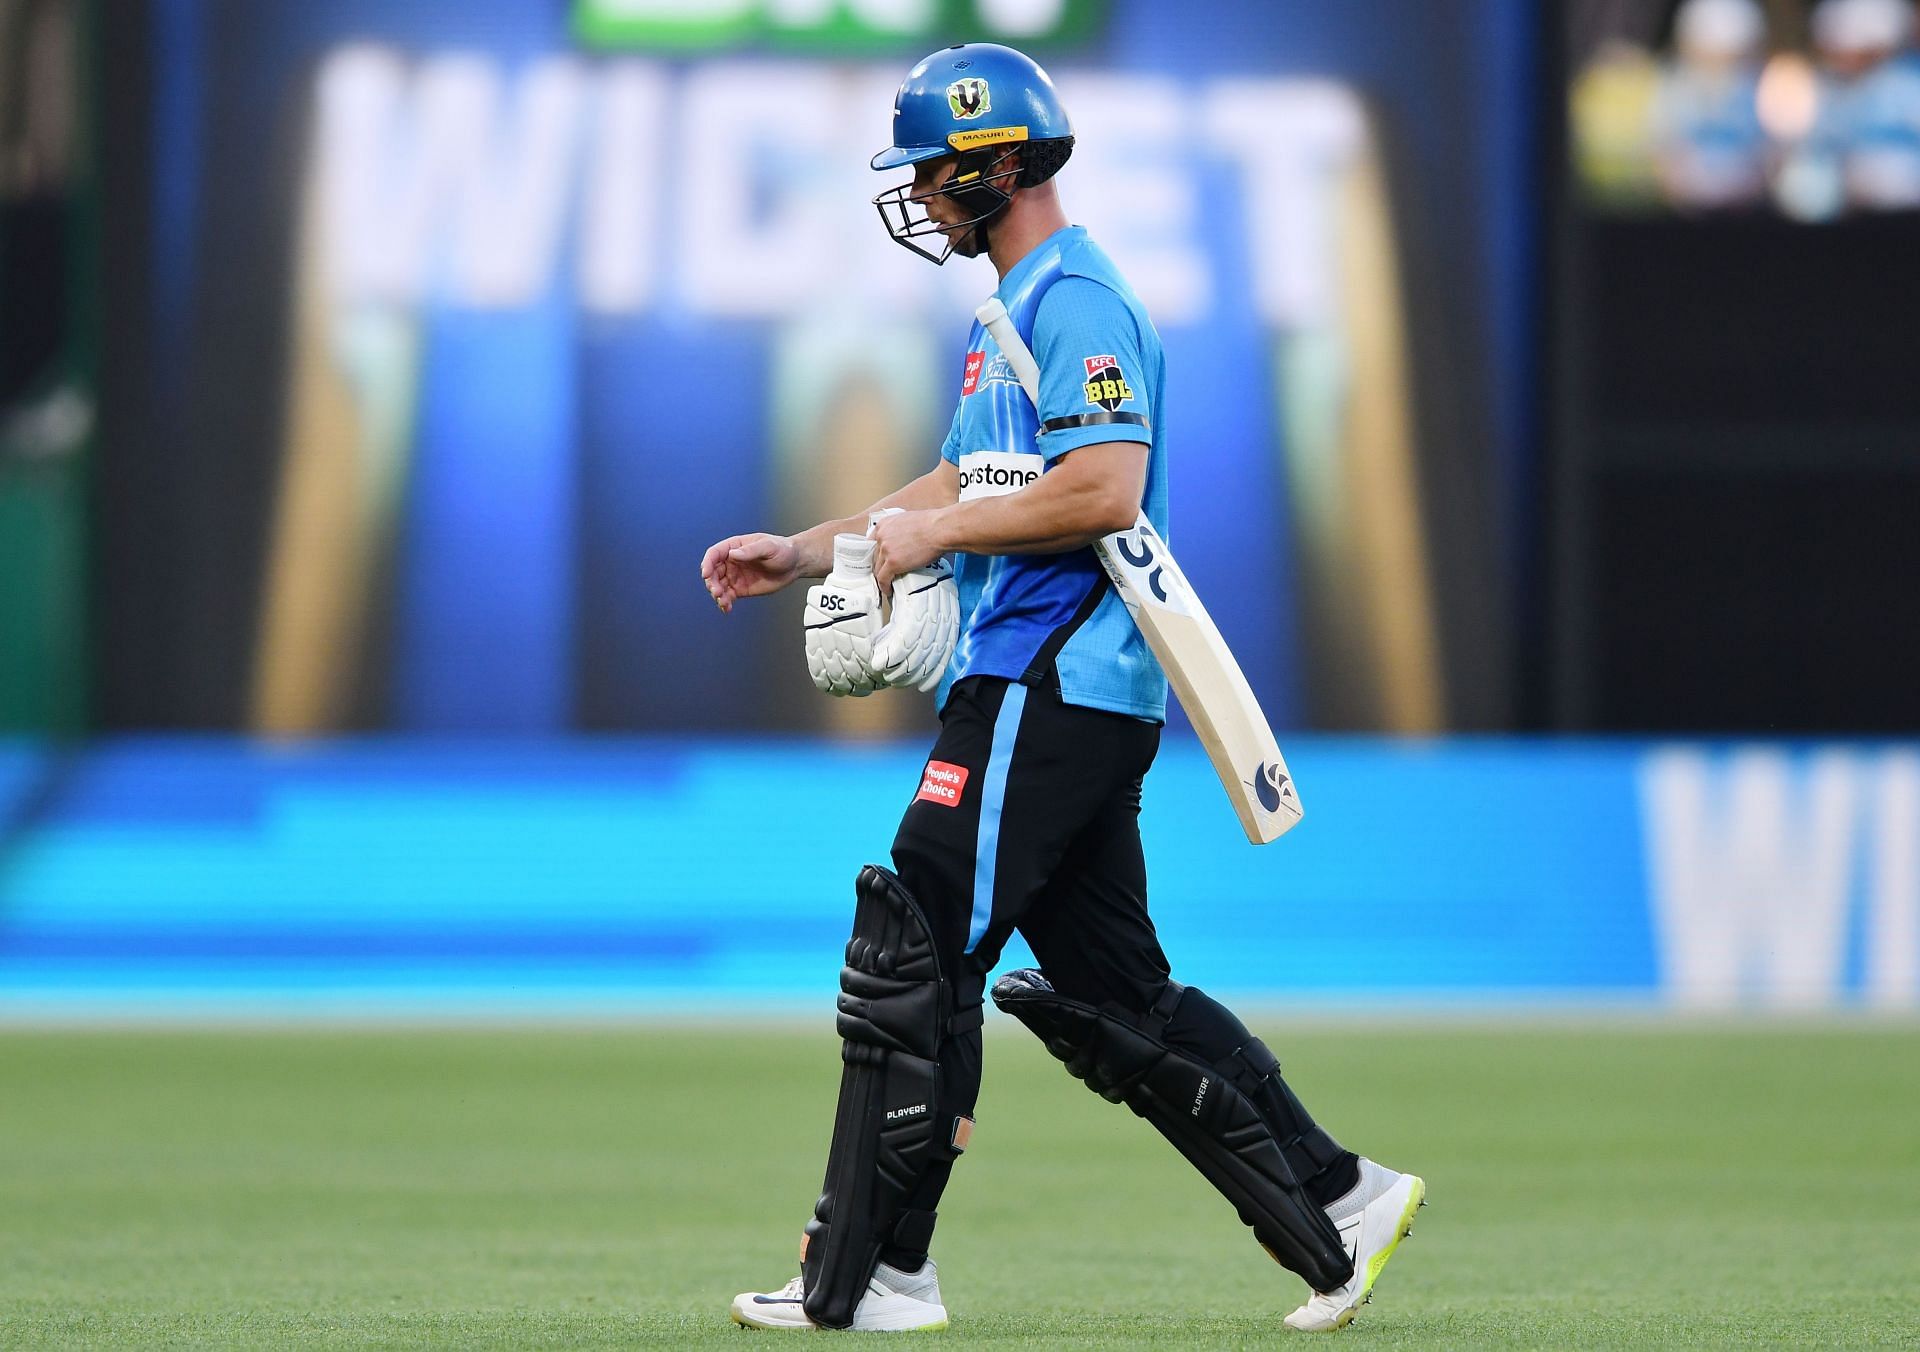 BBL - Adelaide Strikers v Sydney Sixers (Image: Getty)